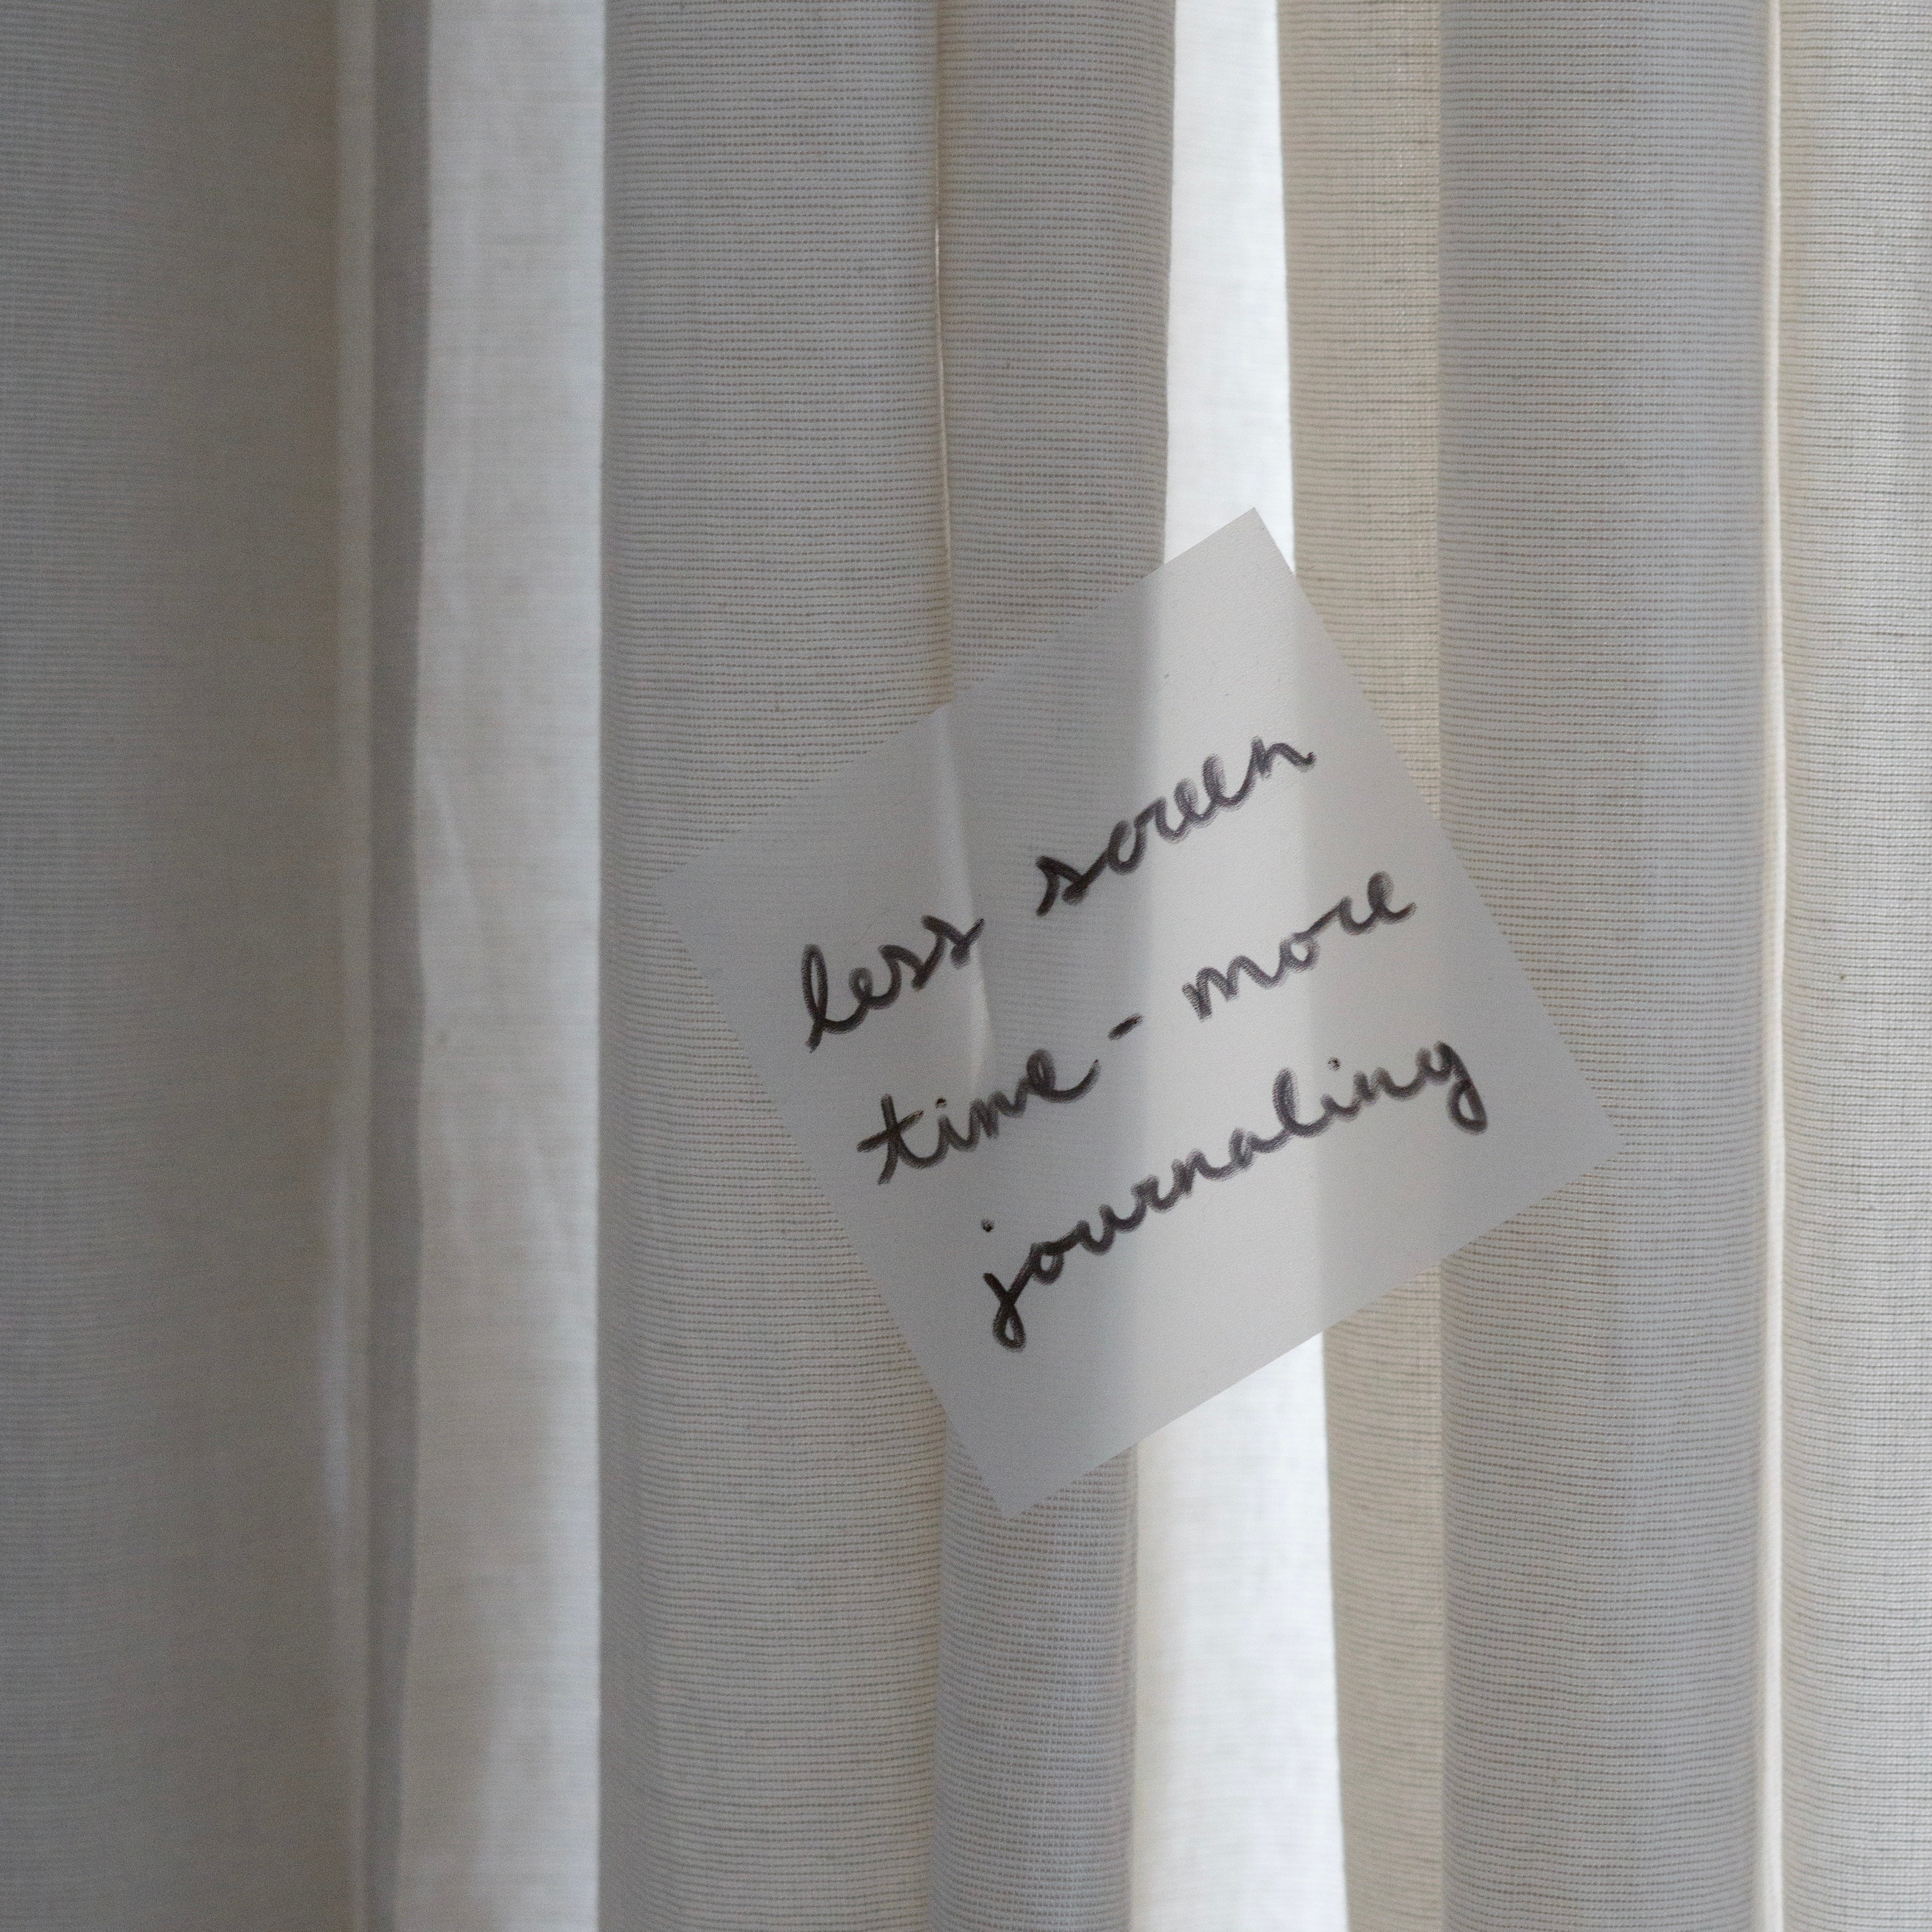 Transparent sticky notes displaying on curtain